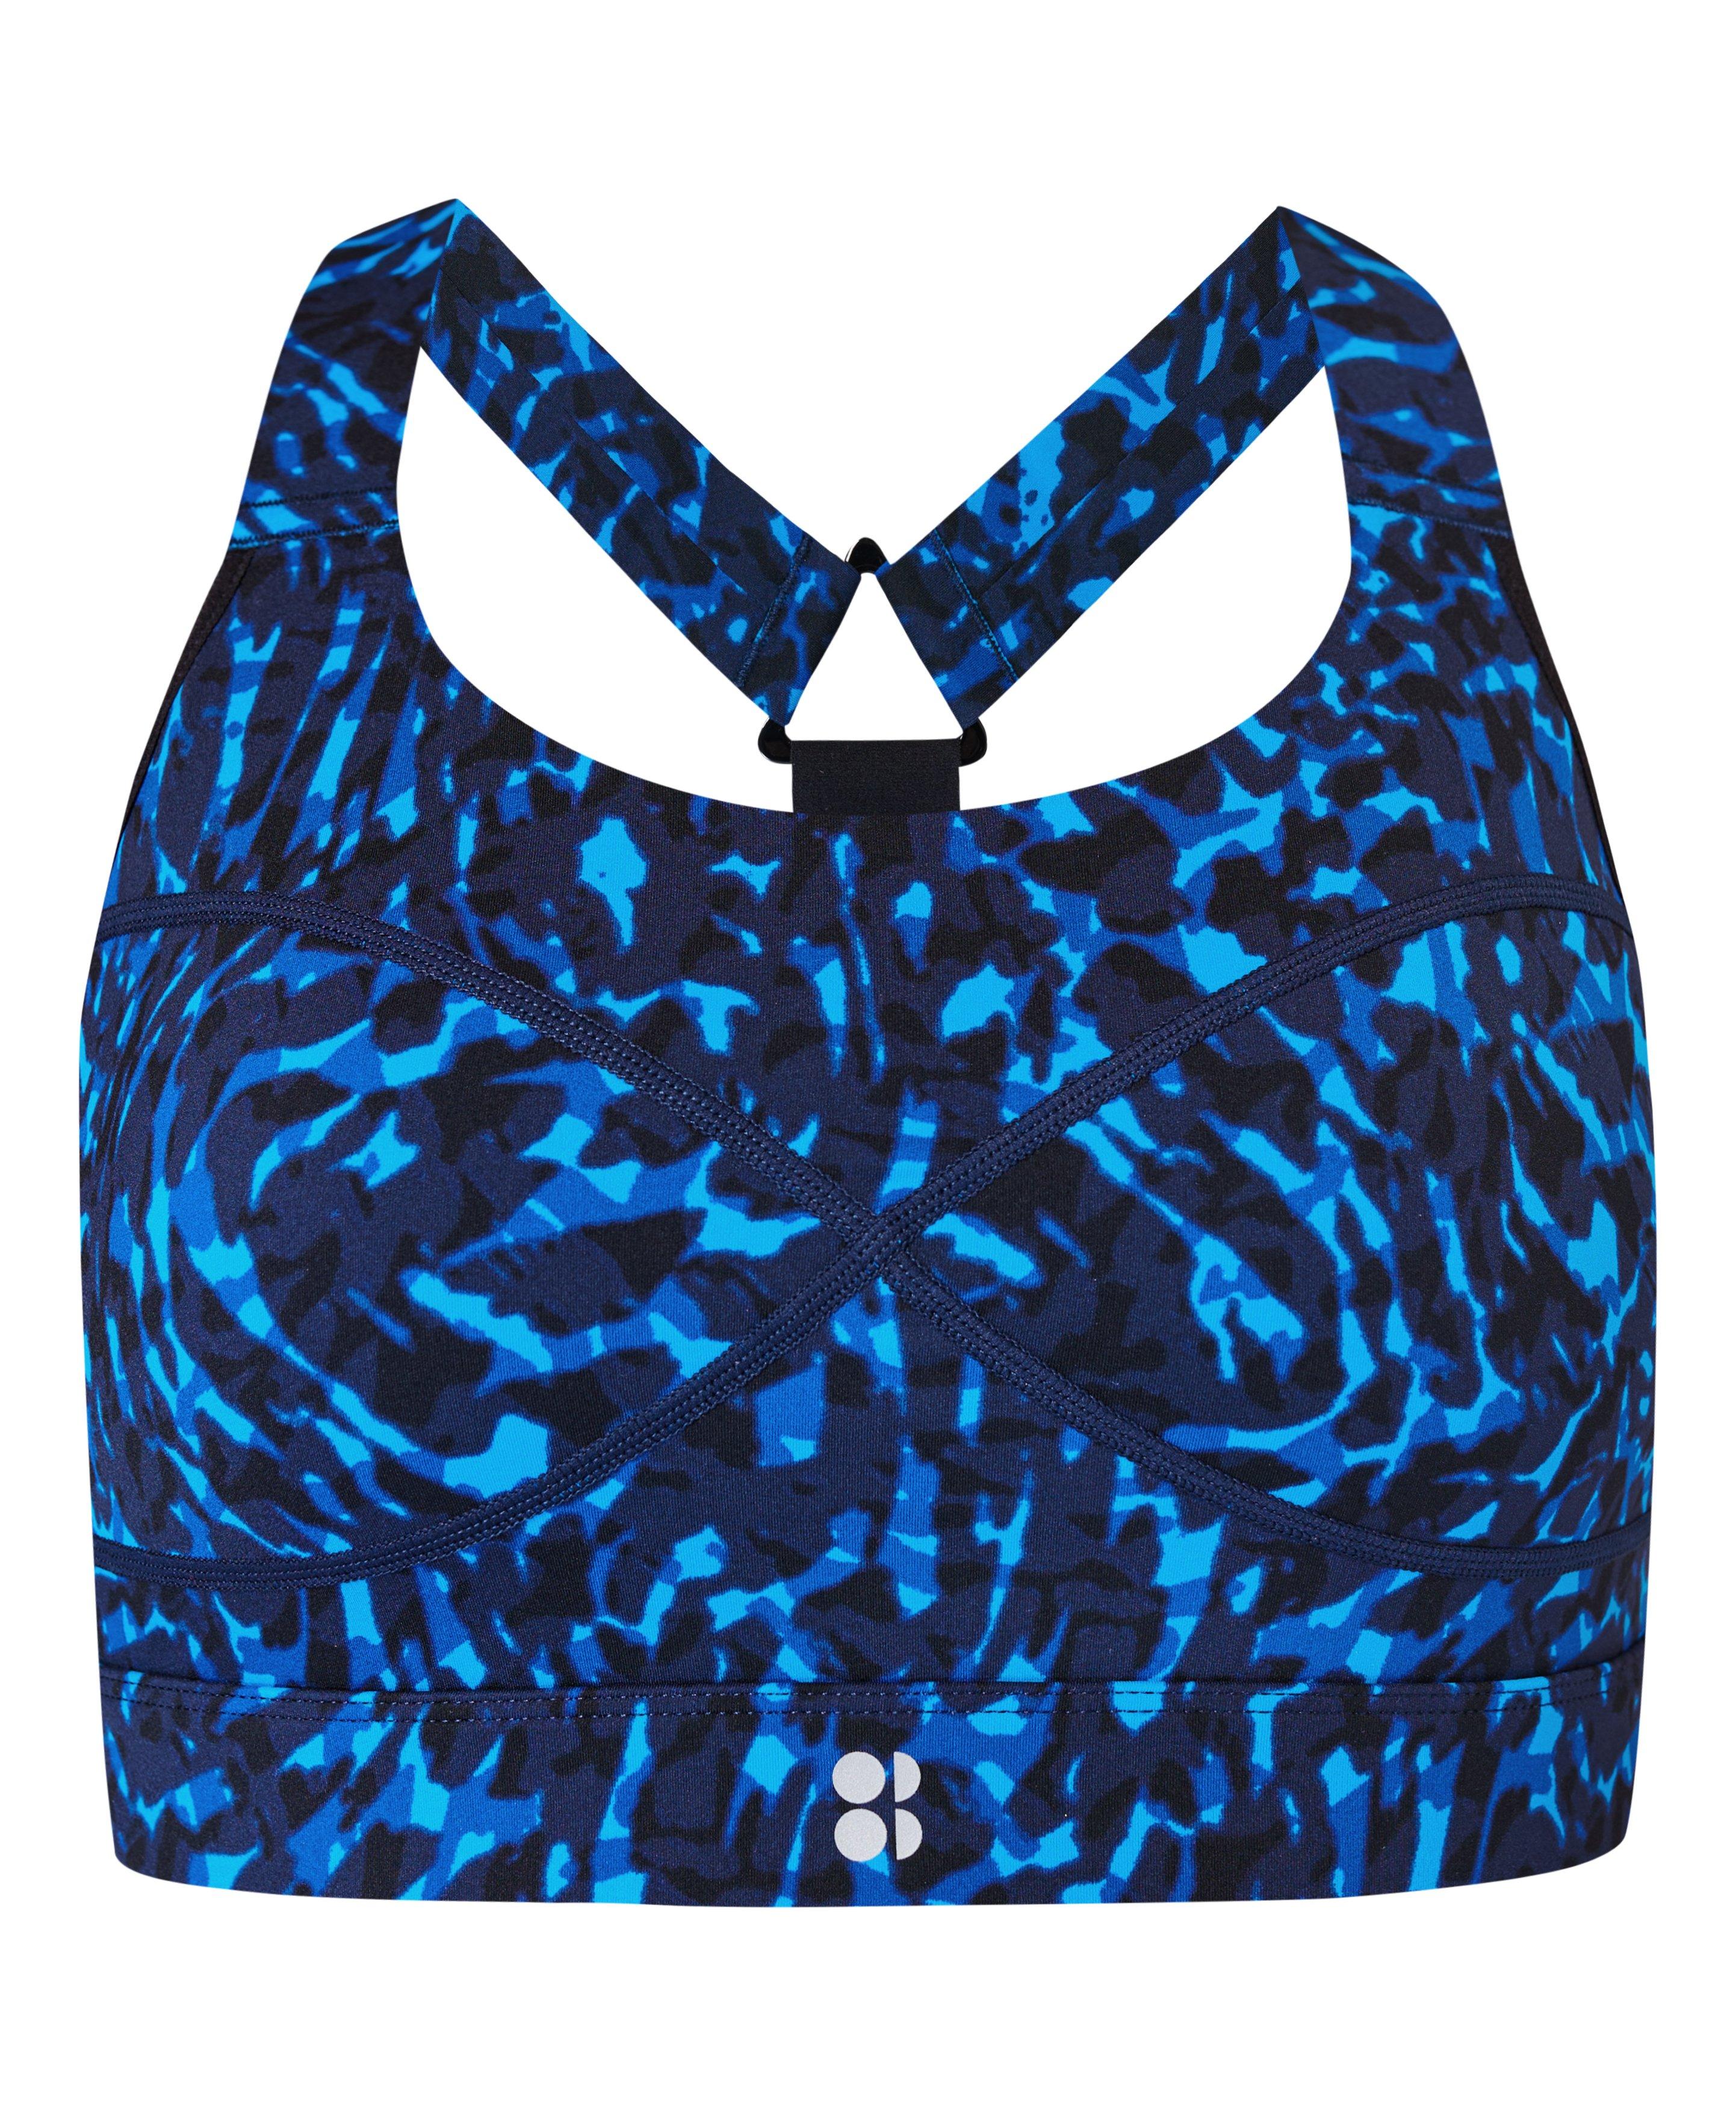 Non-Binary Camouflage Sports Bra - On Trend Shirts – On Trend Shirts